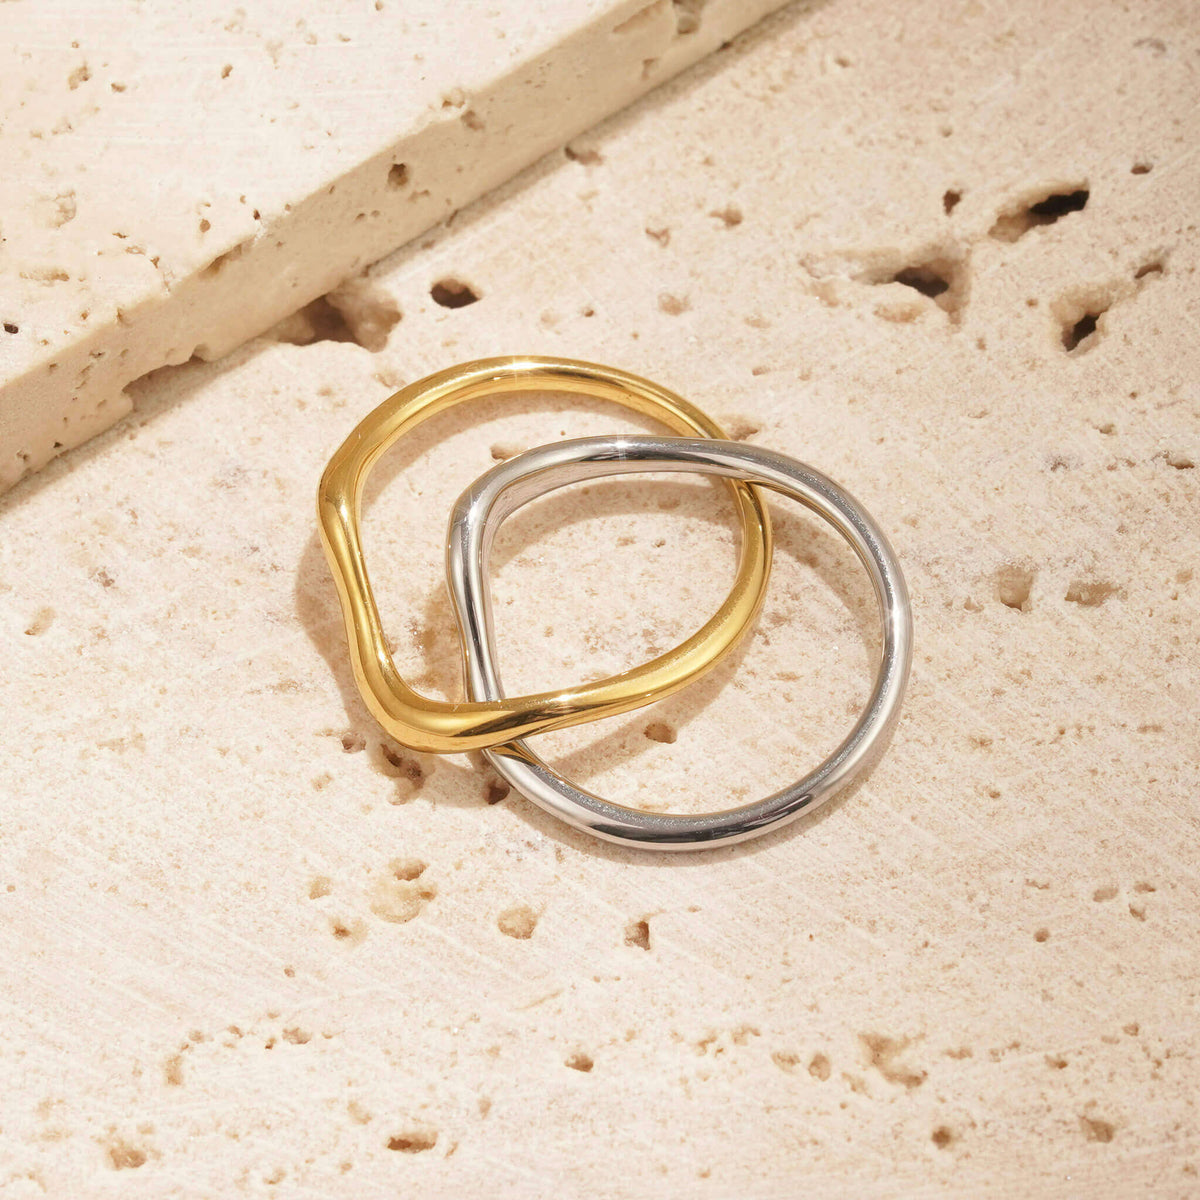 TWO TONE METAL JEWELLERY. this two tone ring has a gold band and a silver band, both of which are attached. they weave together to create a unique design. 